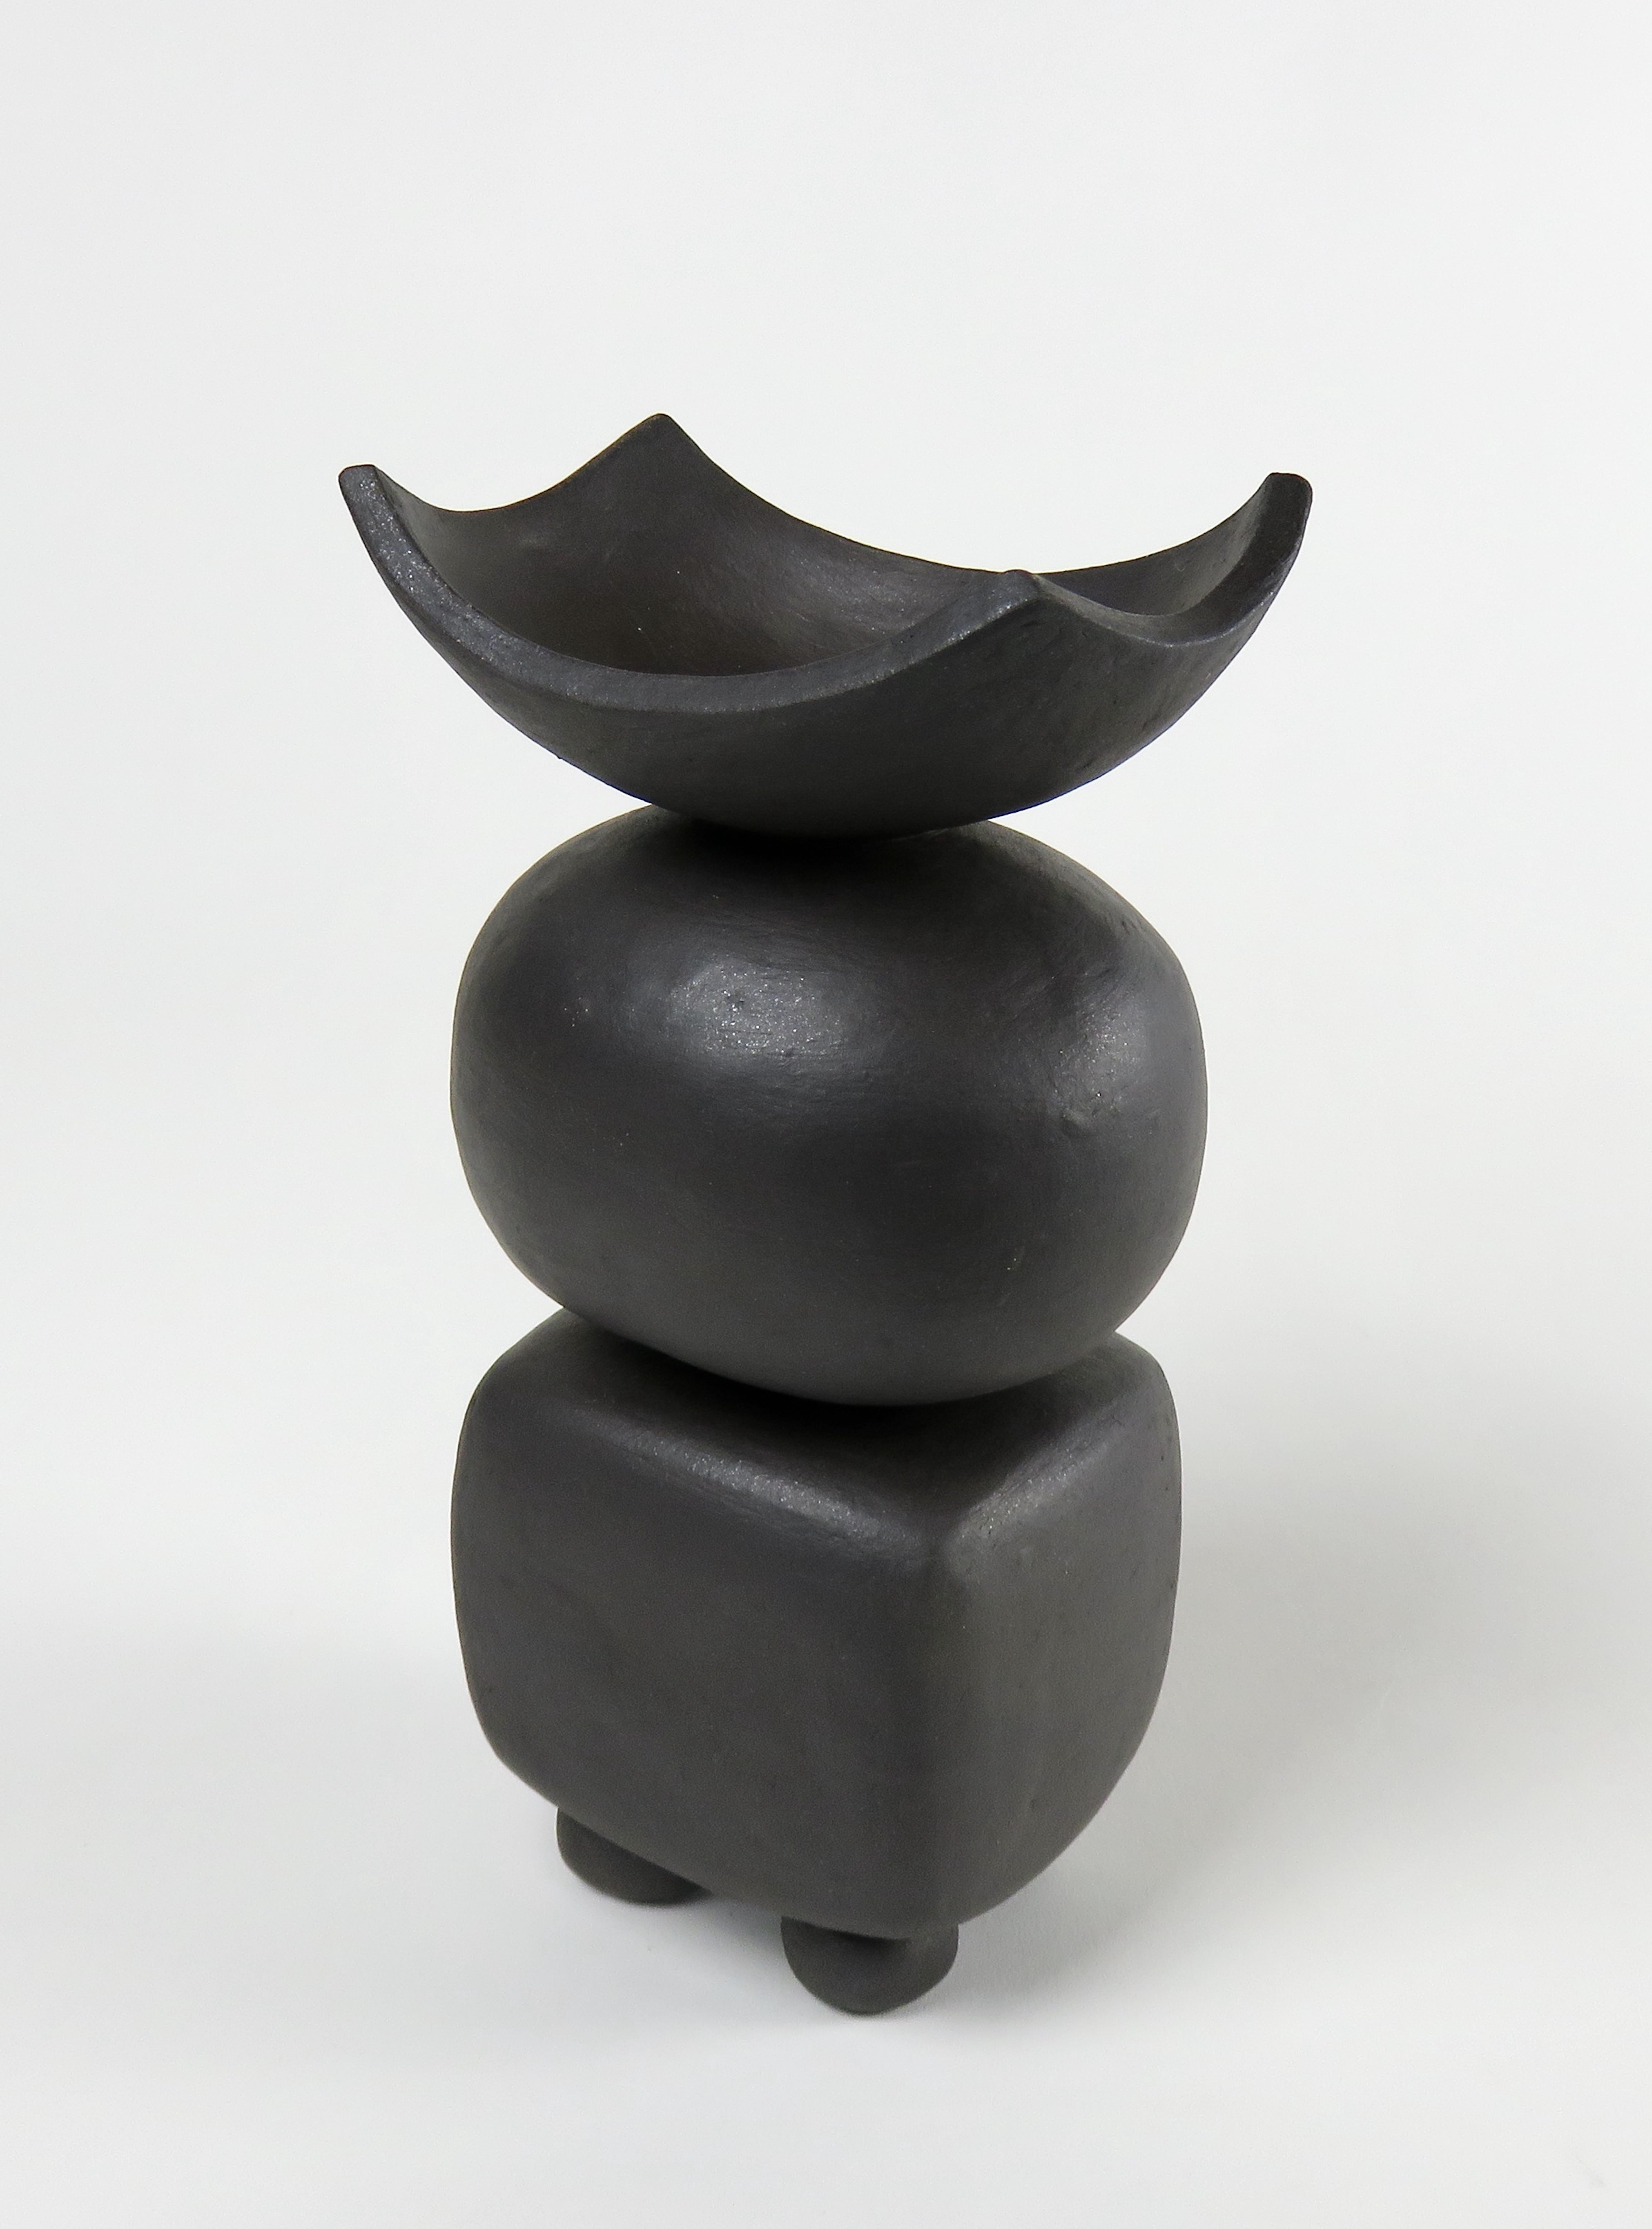 Organic Modern Matte Black Ceramic TOTEM,  Round and Rectangular Forms w/ Open Top, Small Feet